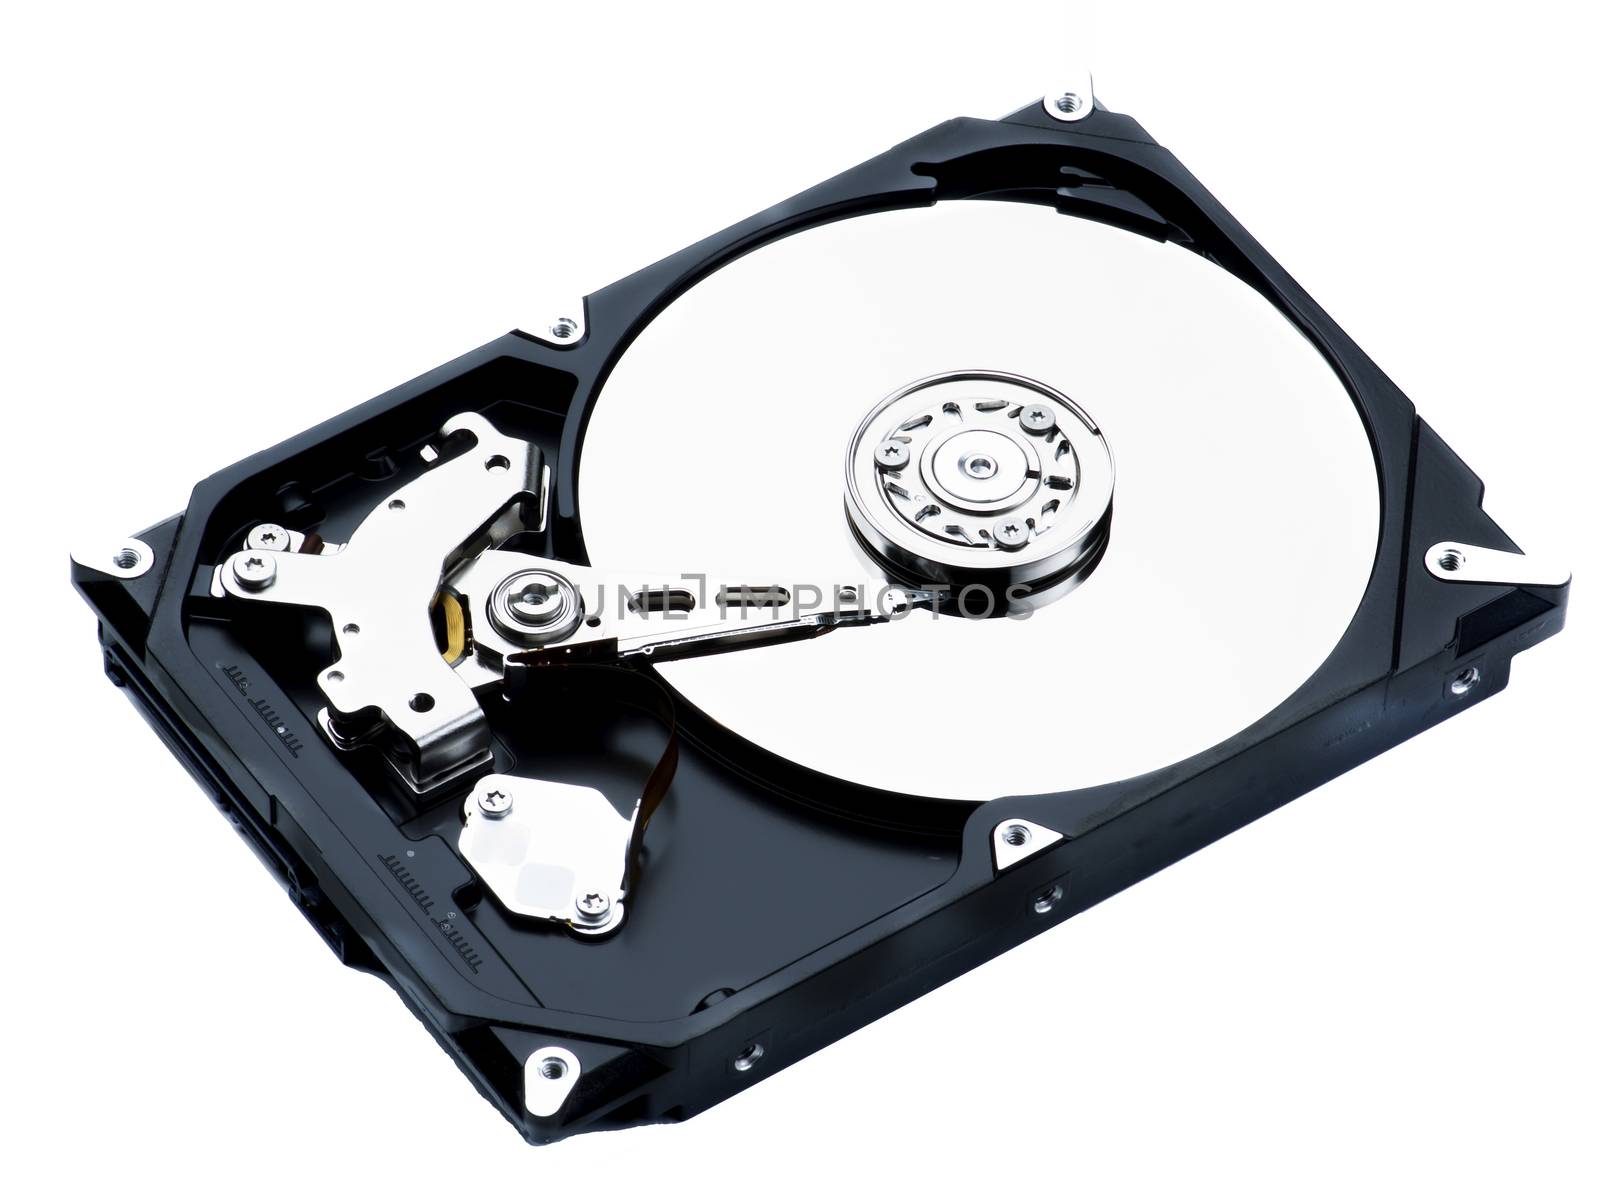 Opened Computer Hard Disk Drive closeup on White background